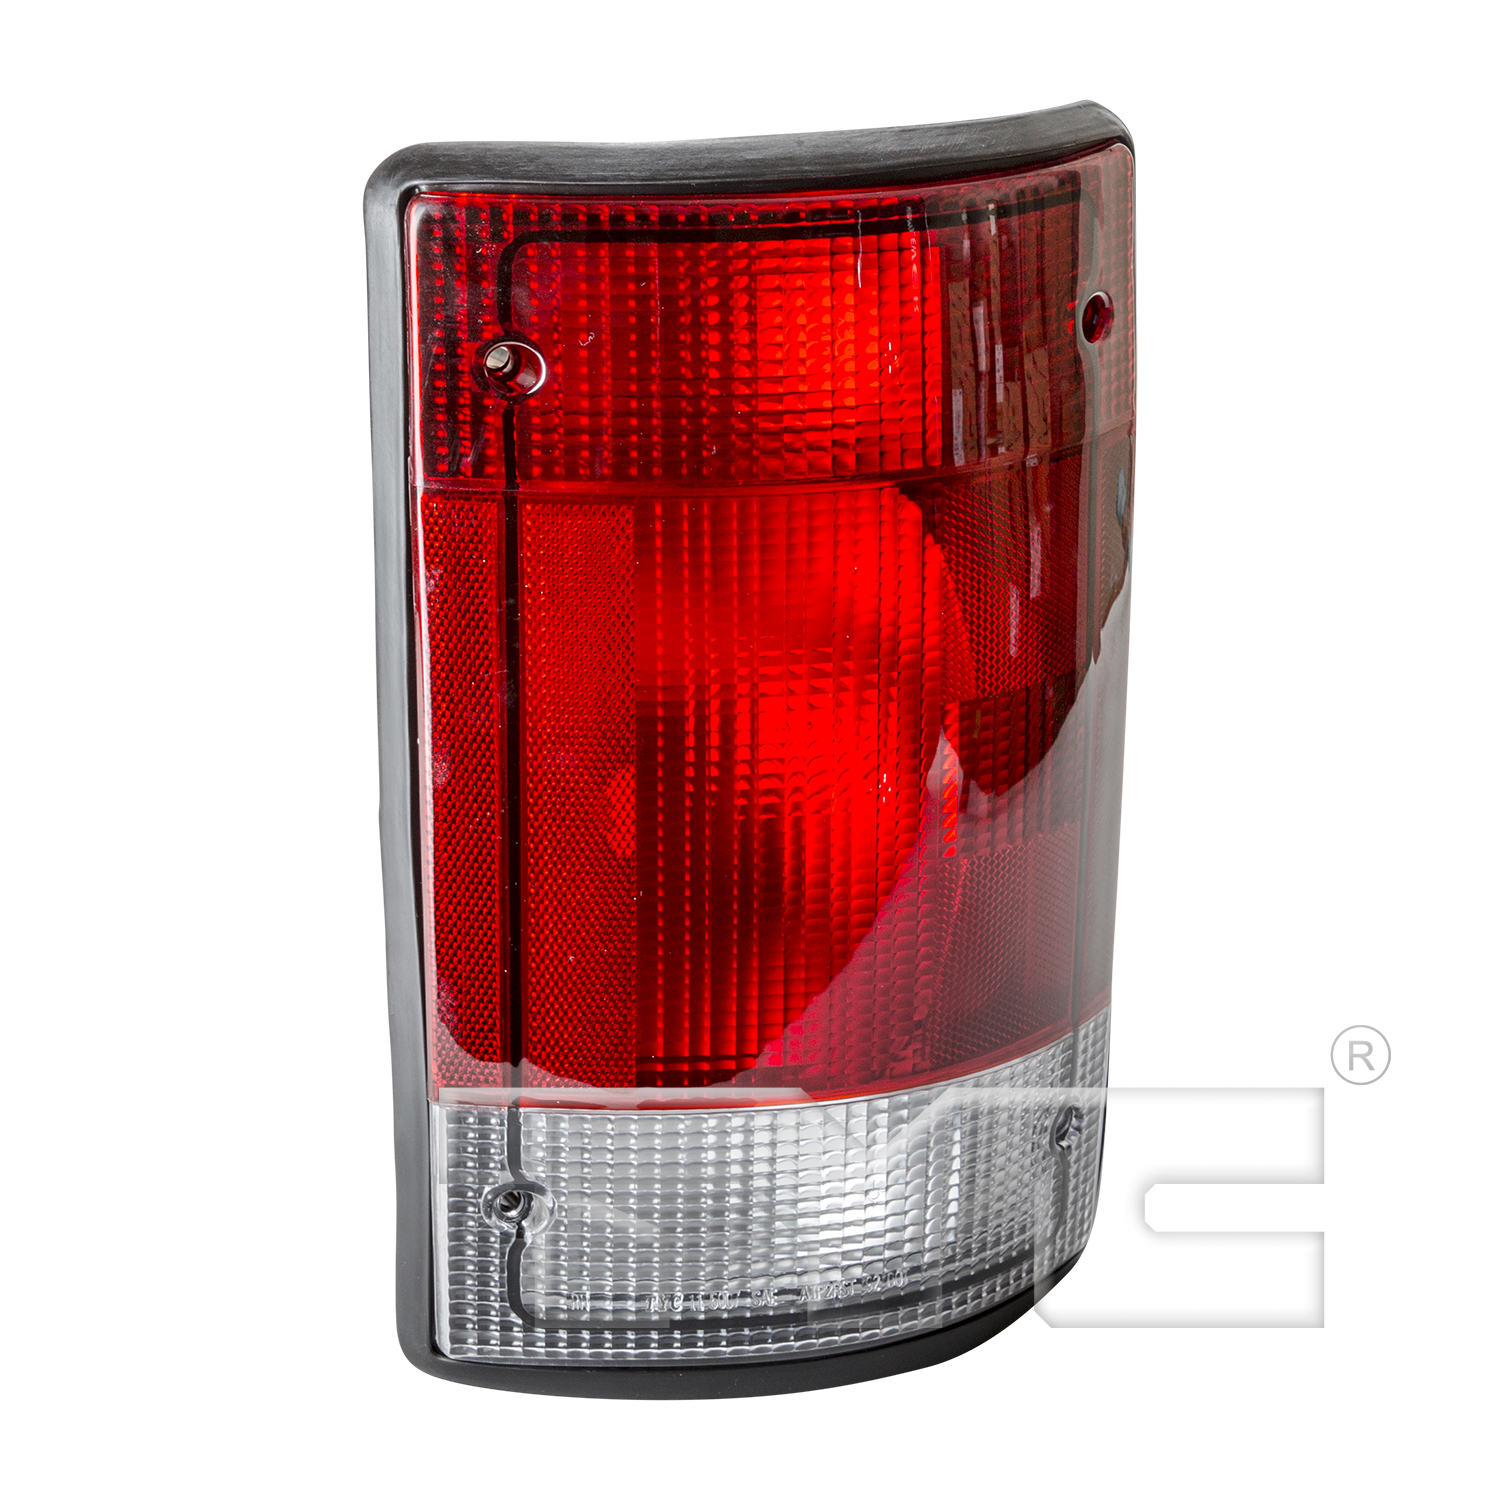 Aftermarket TAILLIGHTS for FORD - E-450 SUPER DUTY, E-450 SUPER DUTY,03-03,RT Taillamp assy